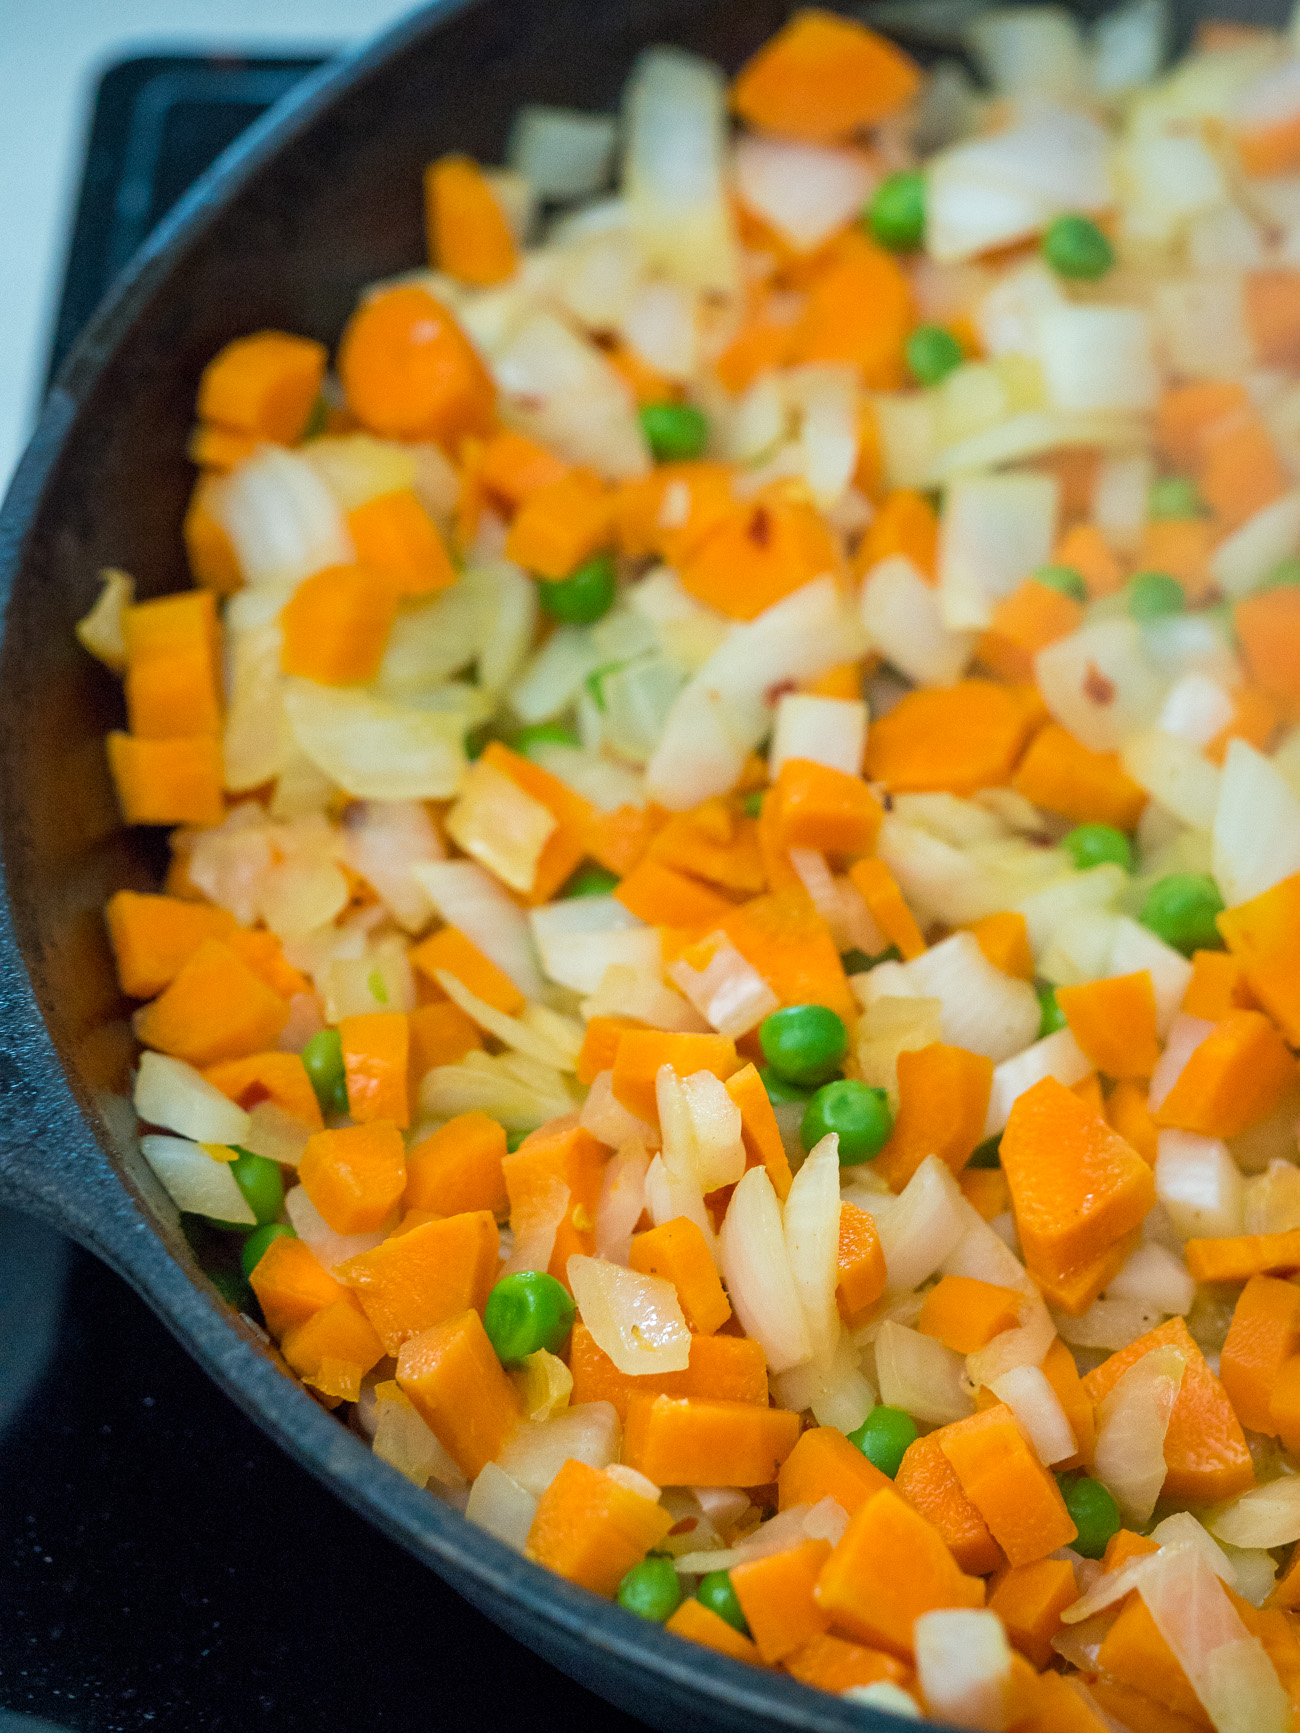 While the rice is cooking, heat butter in a large skillet. Add onion, garlic, ginger, peas, carrots, and salt & pepper. Cook over medium-high heat for 5-7 minutes.